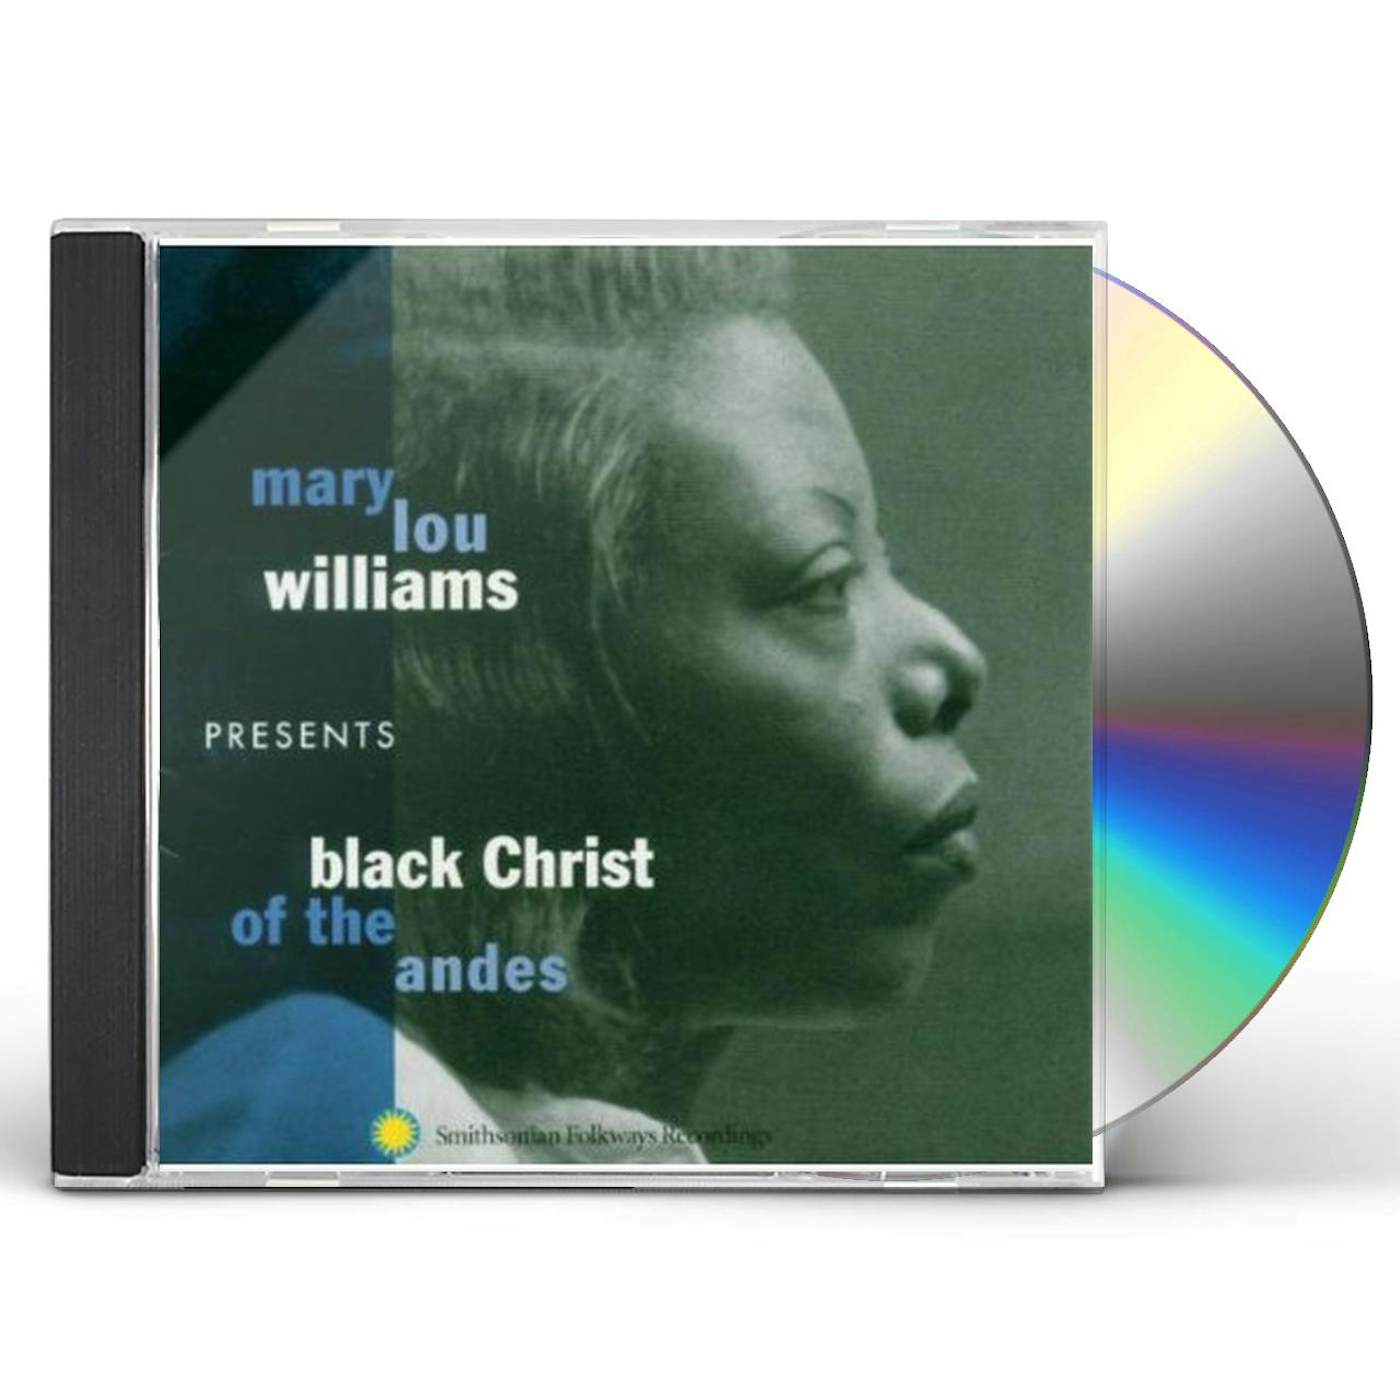 MARY LOU WILLIAMS PRESENTS: BLACK CHRIST OF ANDES CD